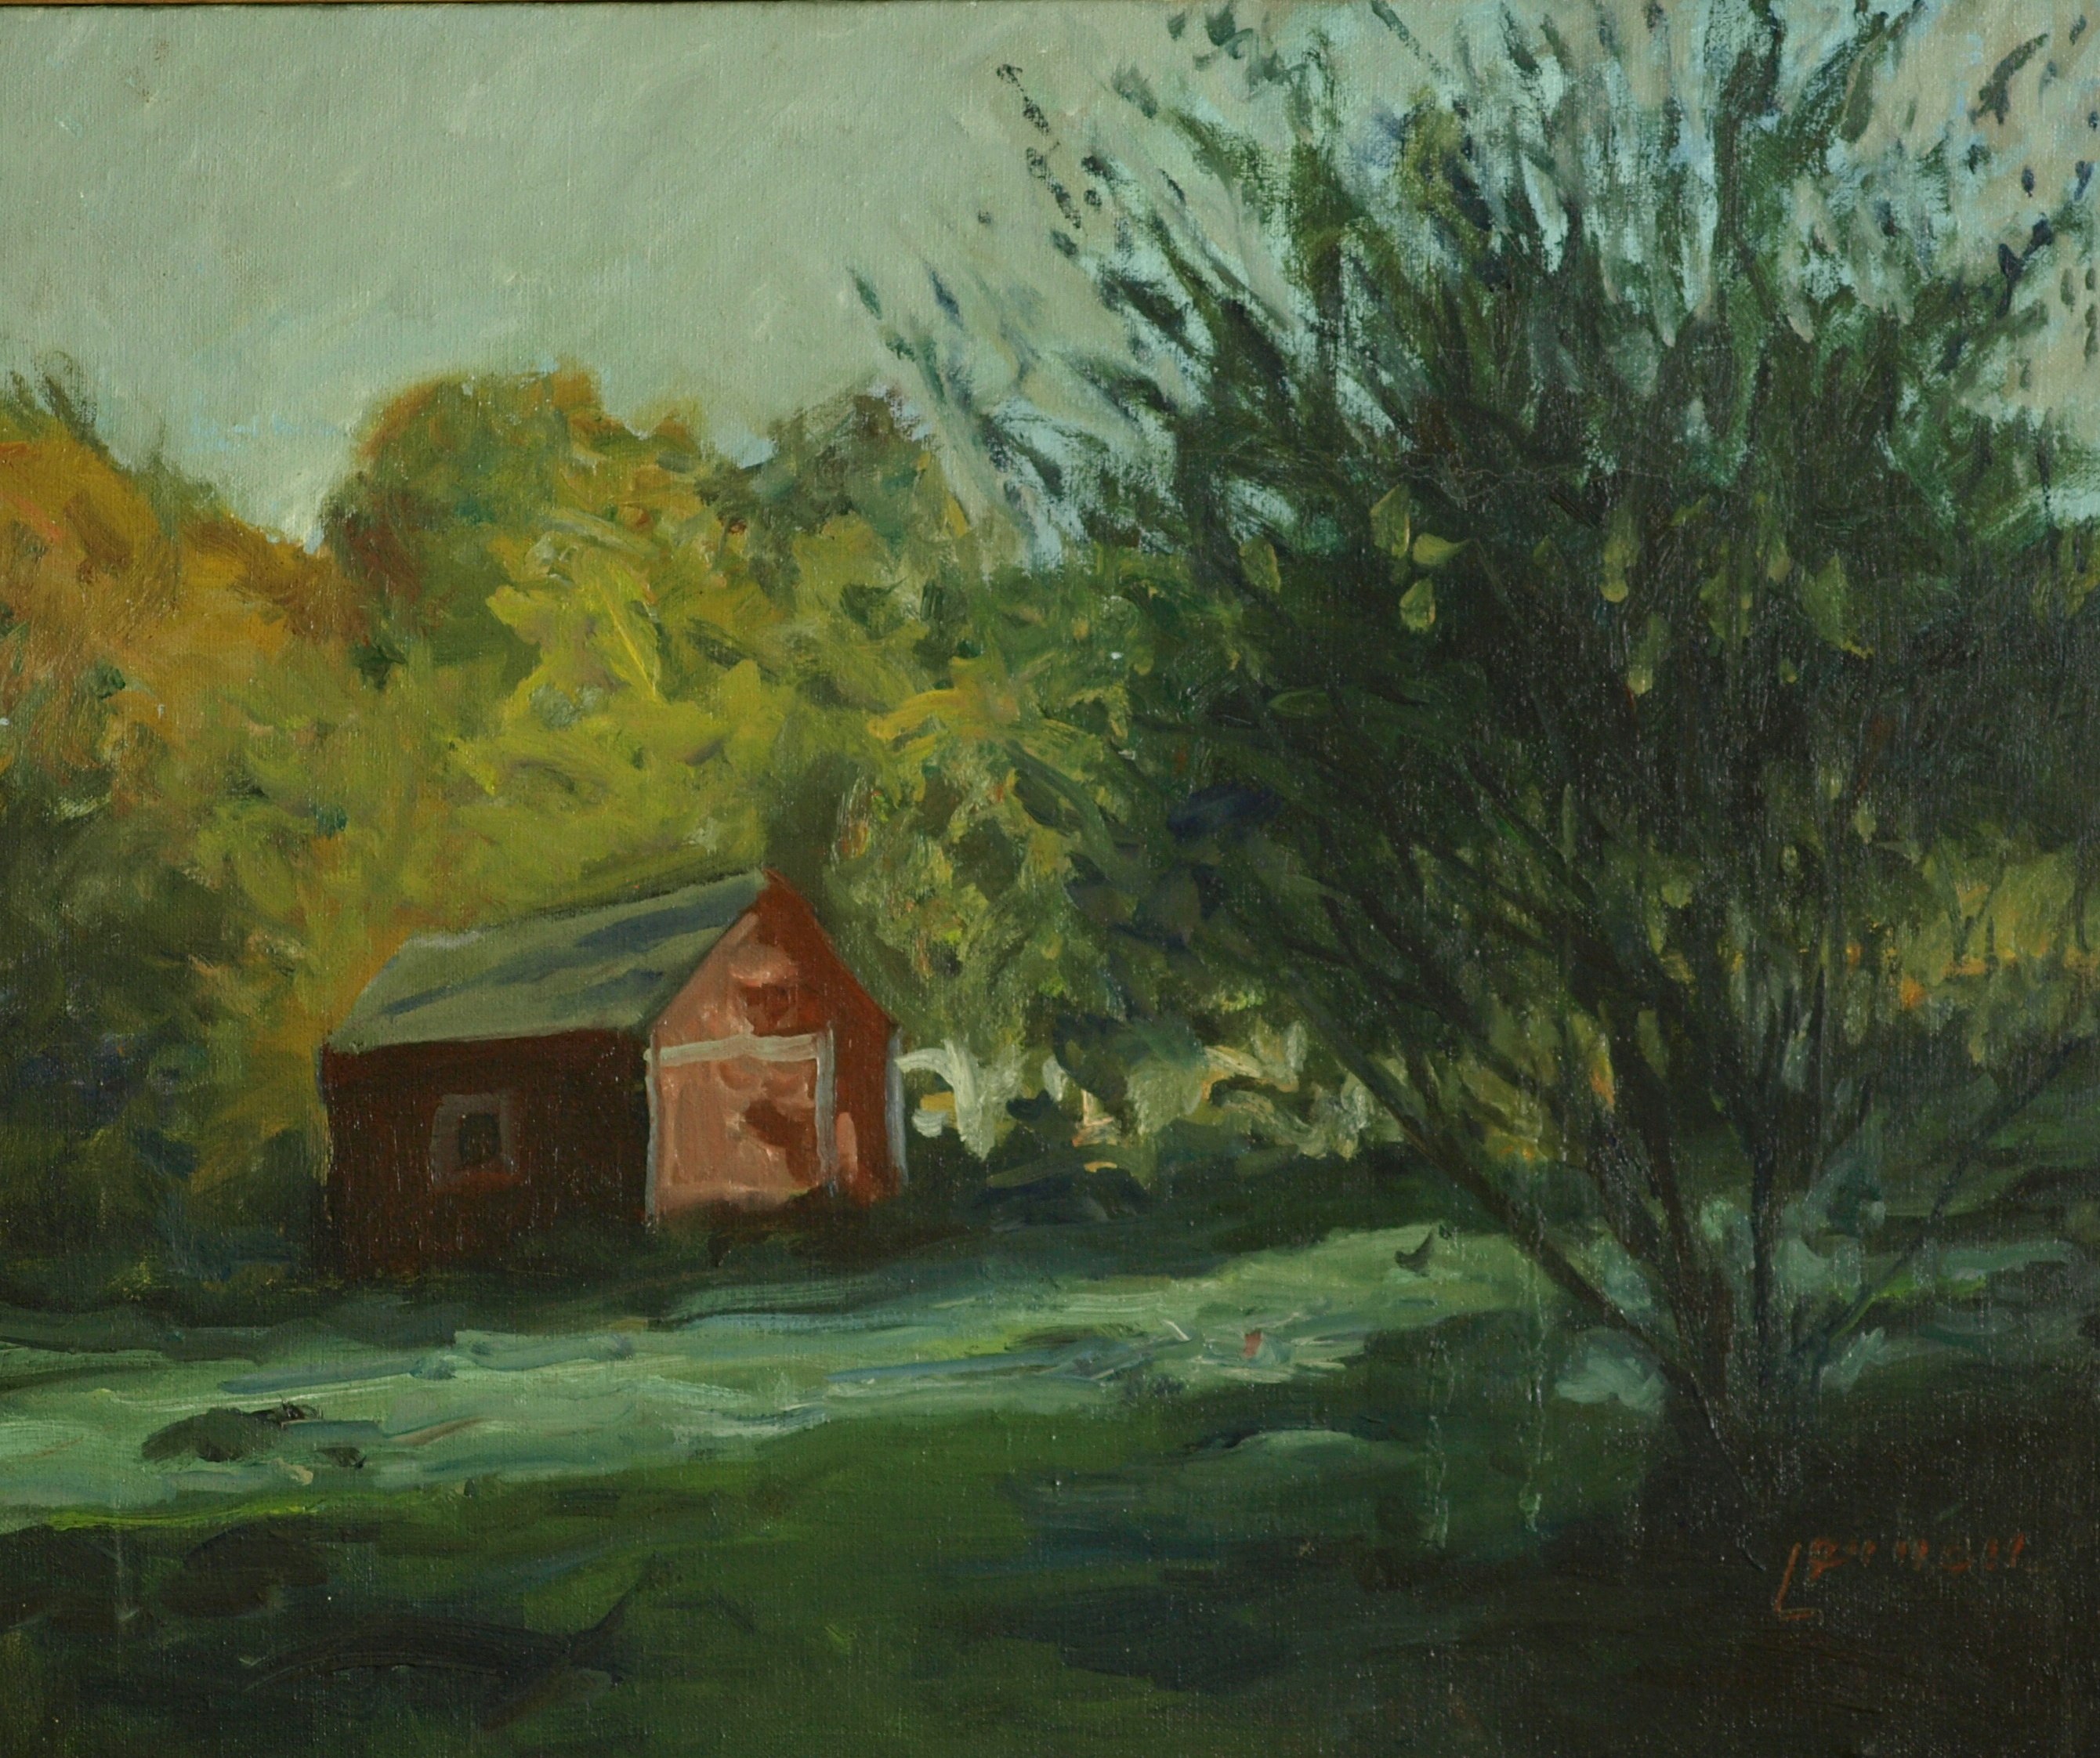 Summer Afternoon, Oil on Canvas, 20 x 24 Inches, by Bernard Lennon, $875